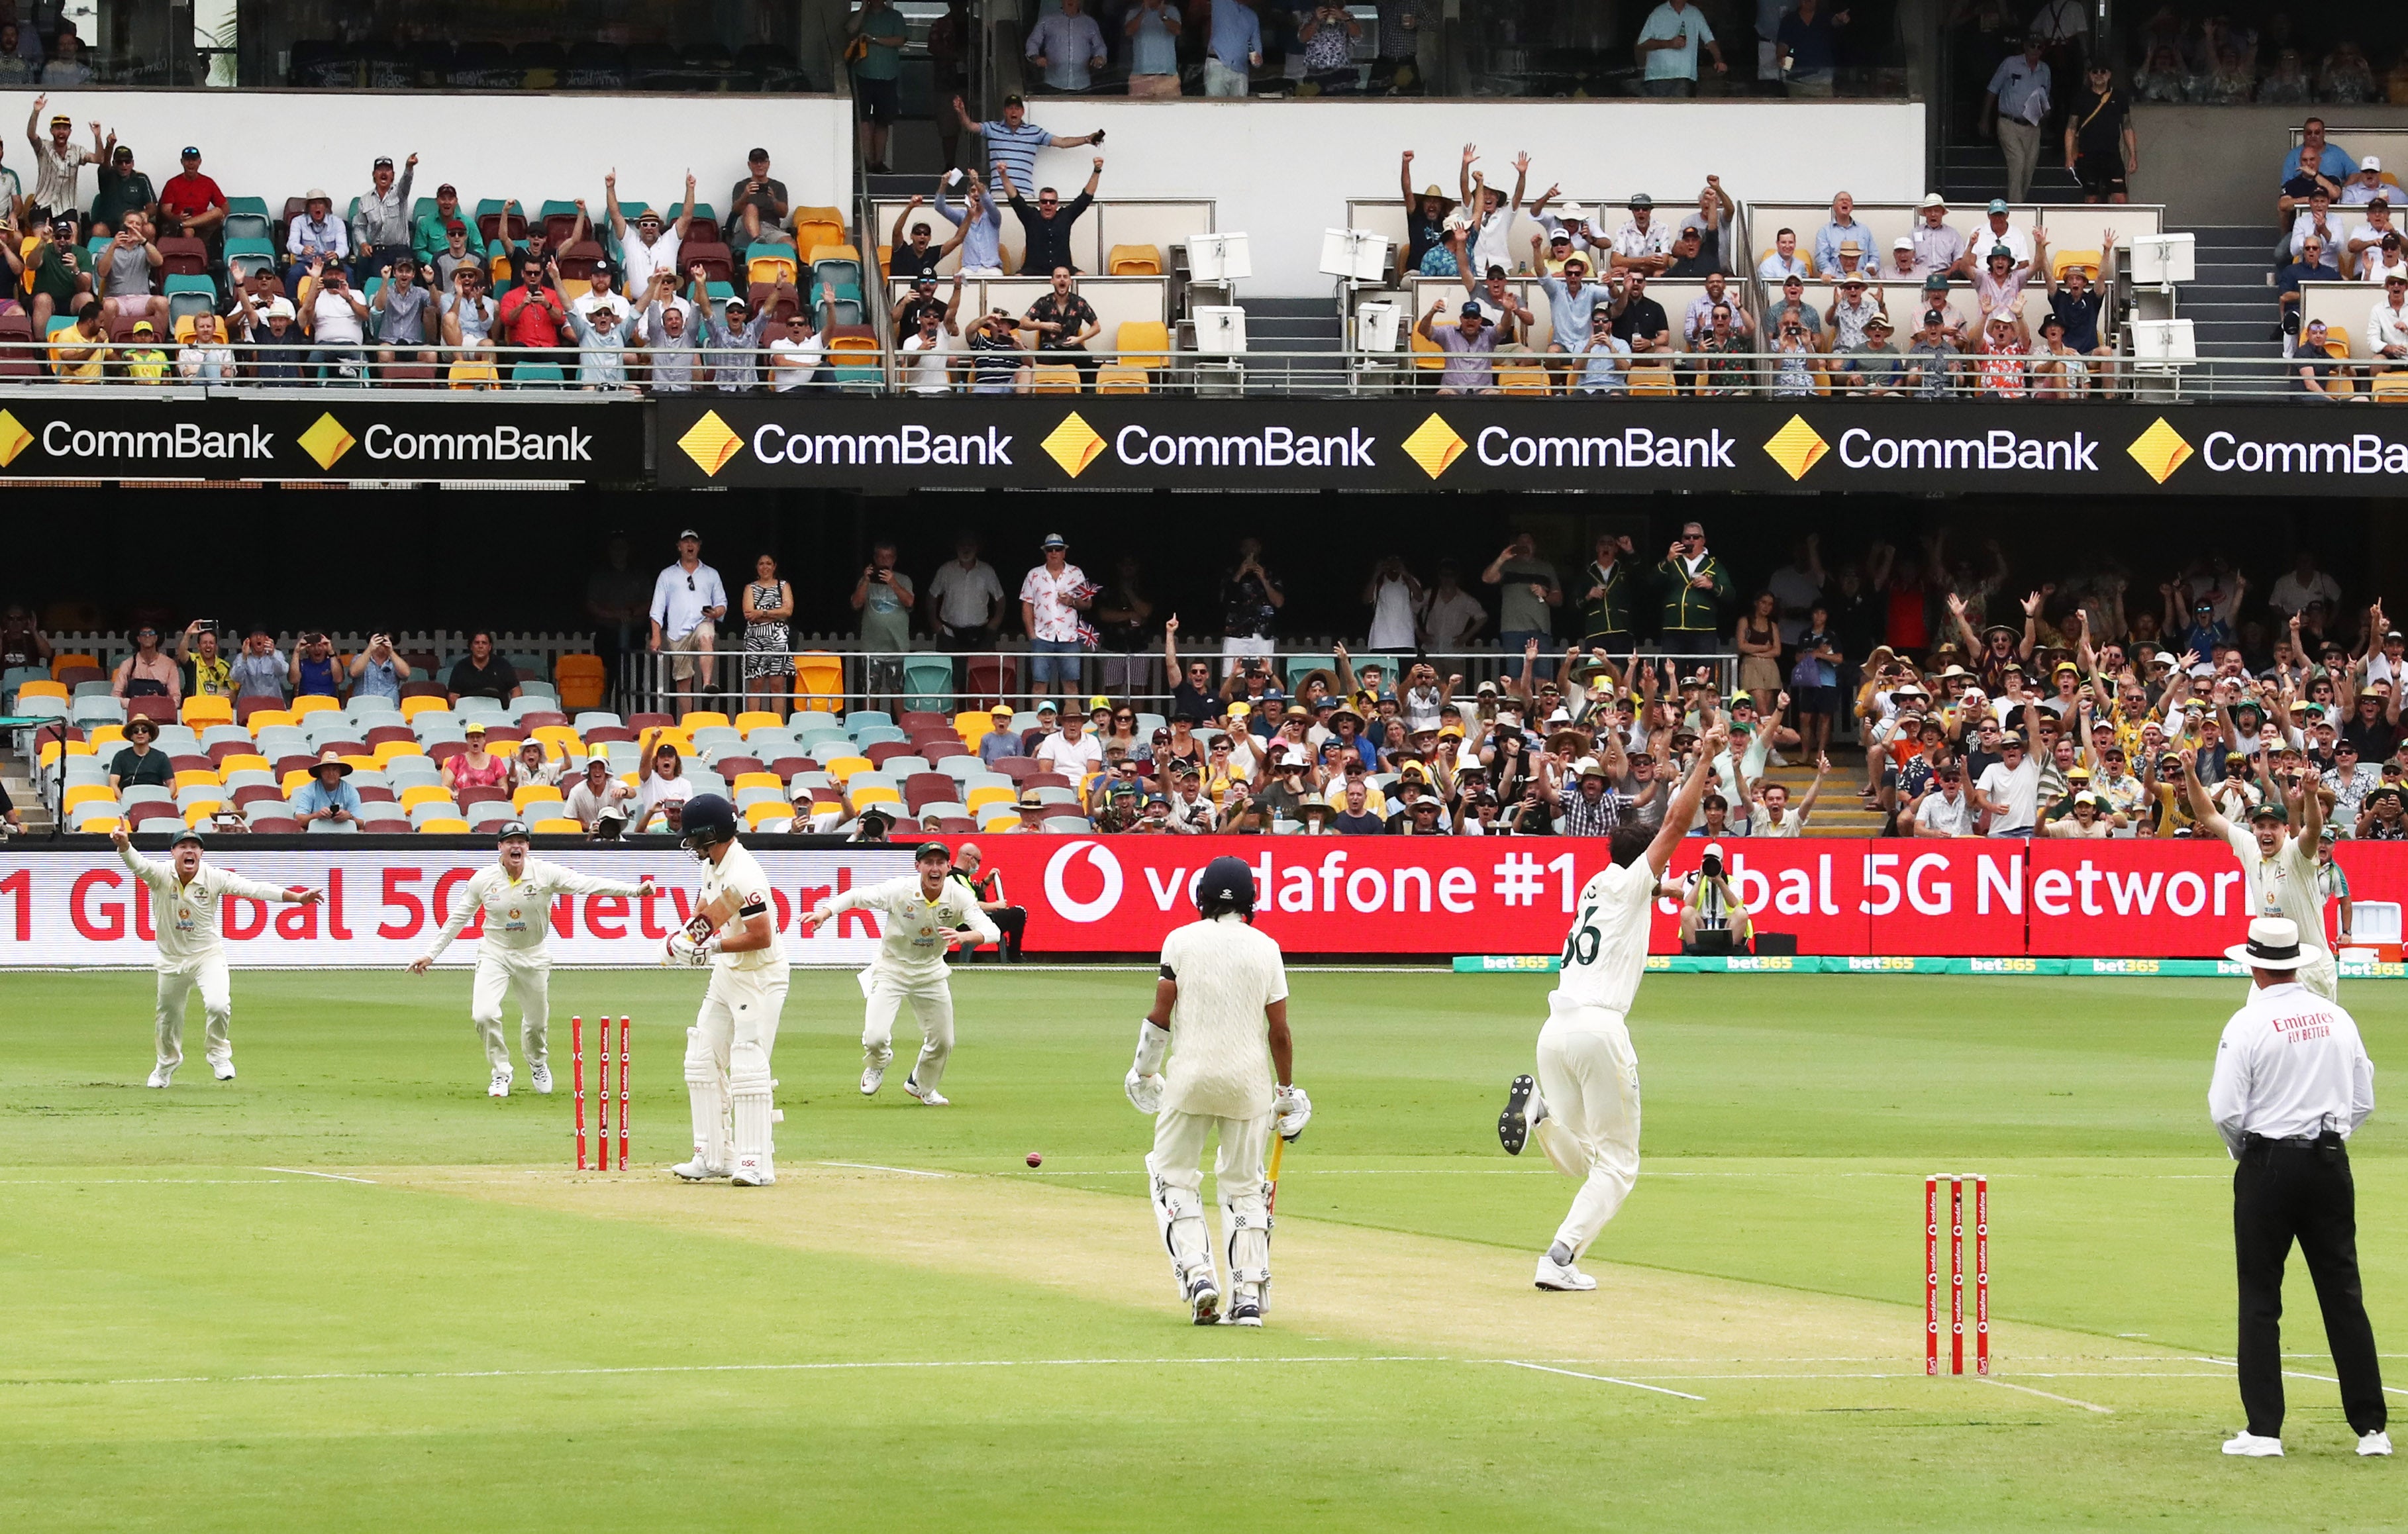 Burns was memorably bowled by Starc with the first ball of the 2021 series